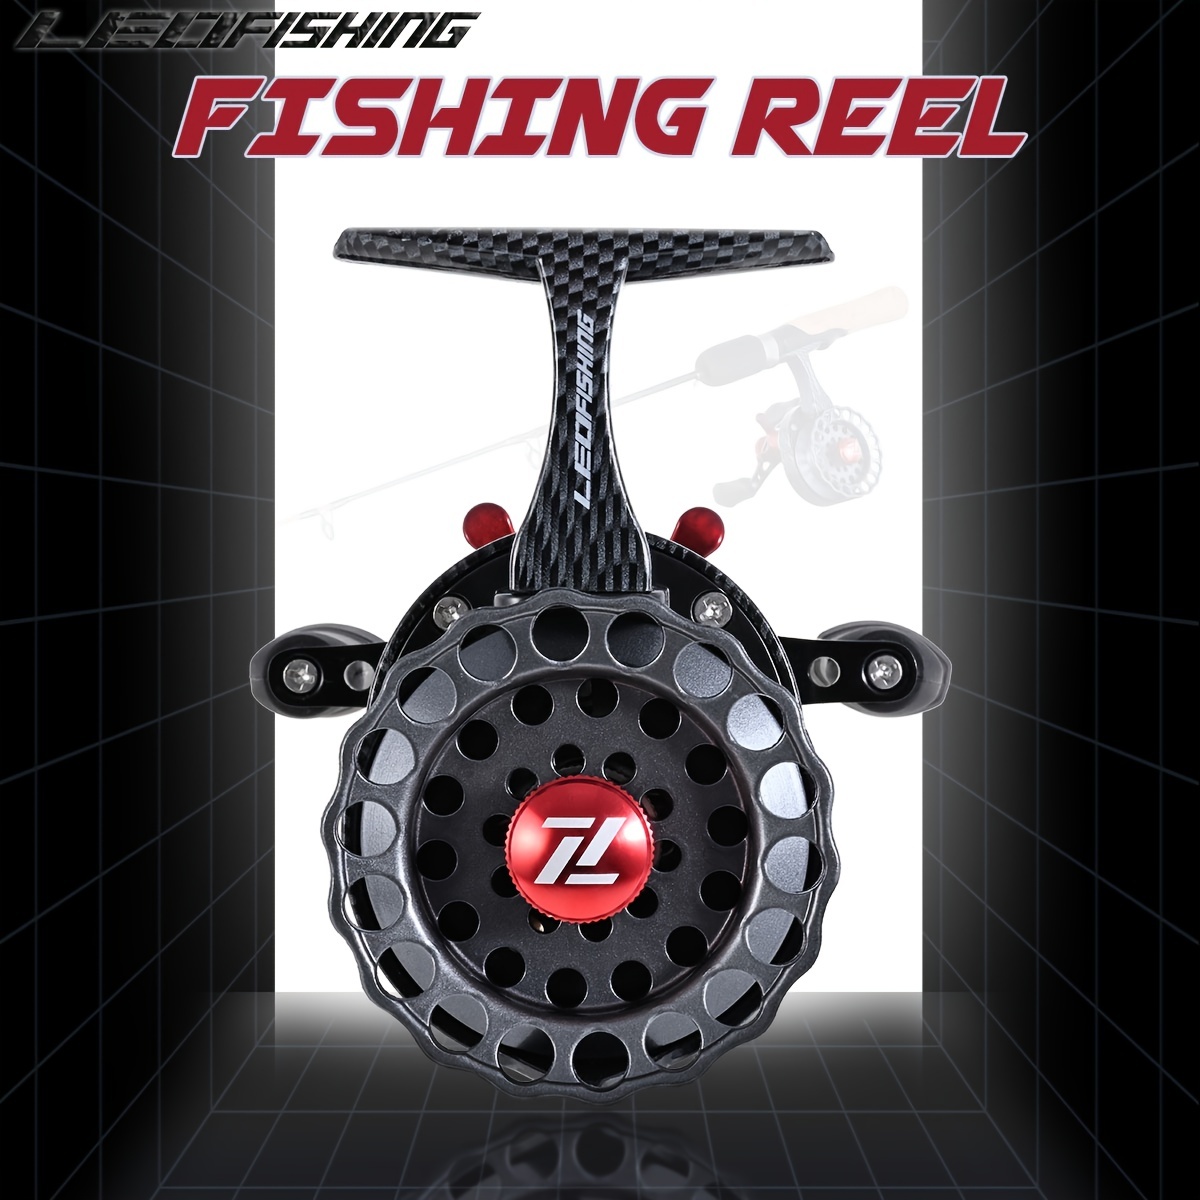 LEOFISHING Stainless Steel Crappie Fishing Reel - Smooth 4+1 BB System with  3.5:1 Gear Ratio